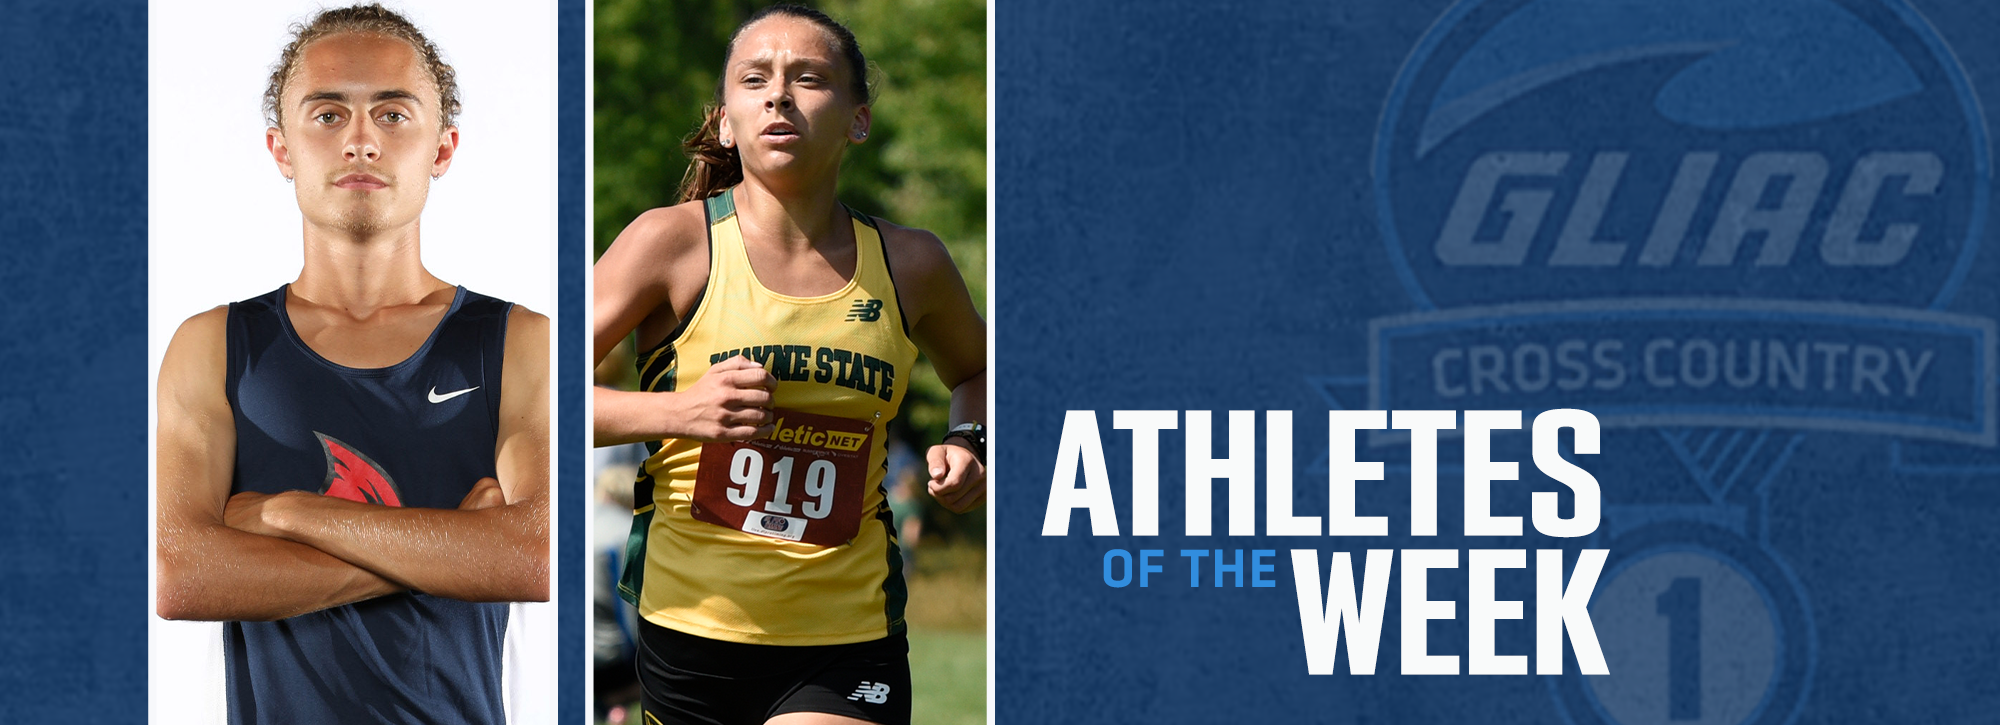 SVSU's Brown and WSU's Justice earn athlete of the week recognition in cross country